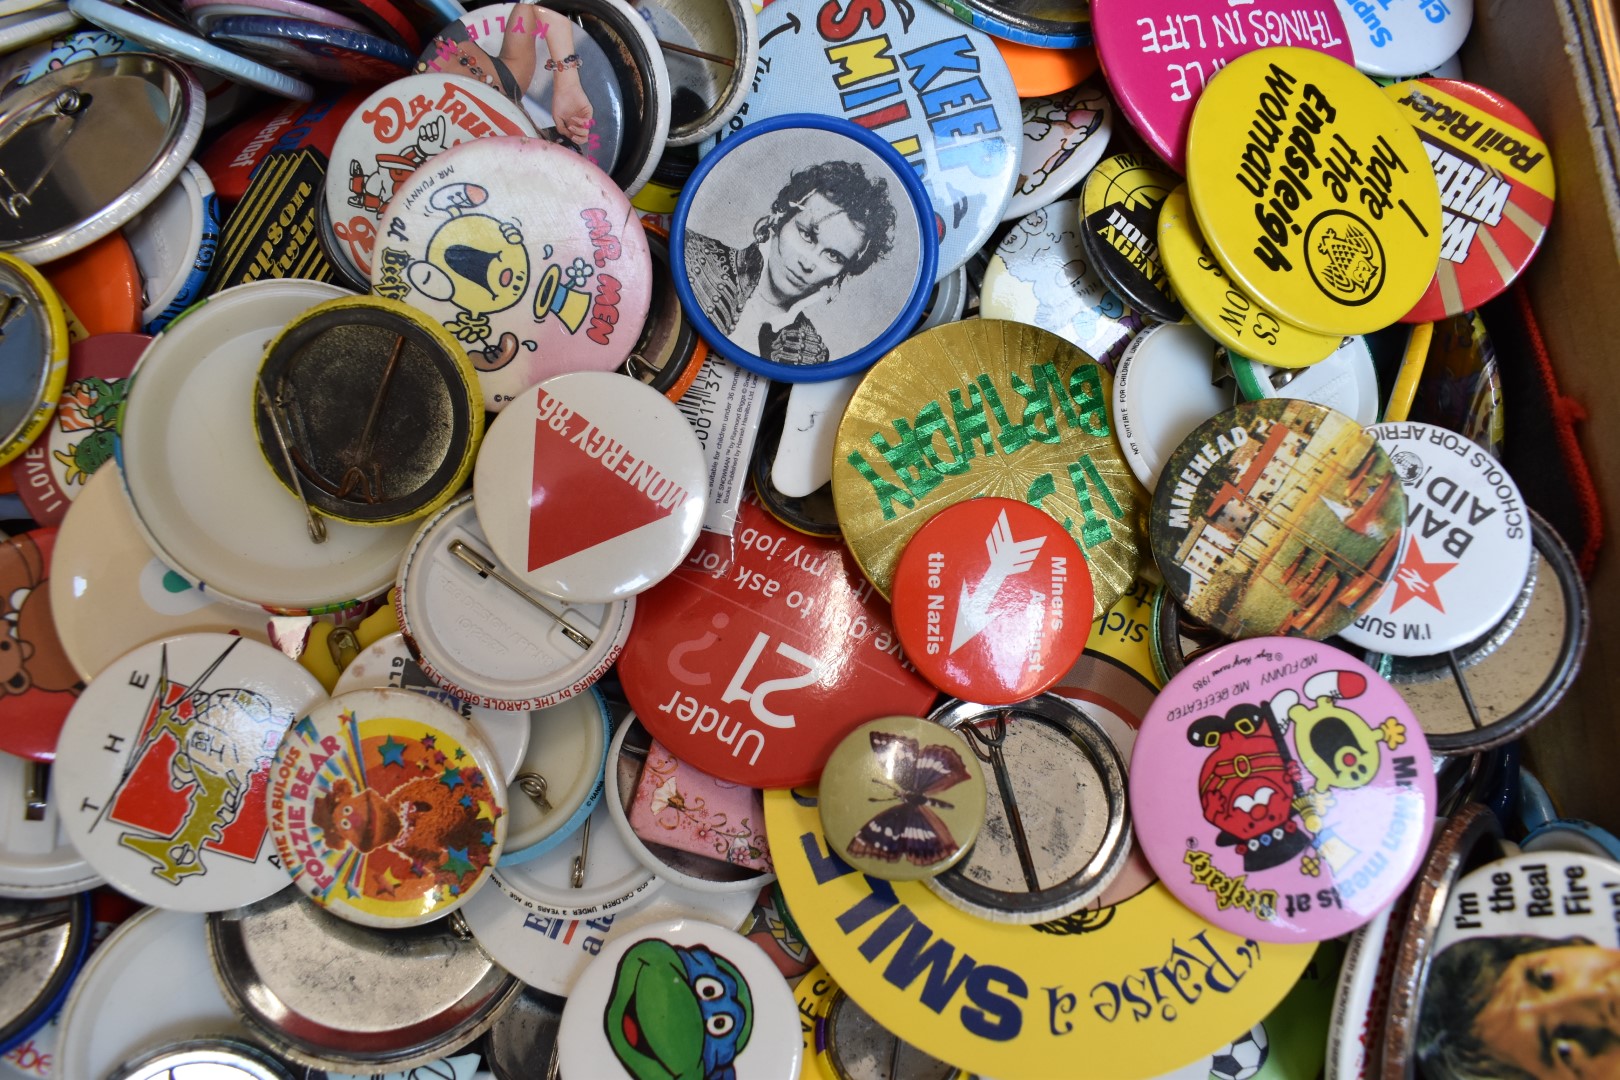 Over 1000 vintage and collectable badges including social history, advertising, humorous, slogans, - Image 8 of 9